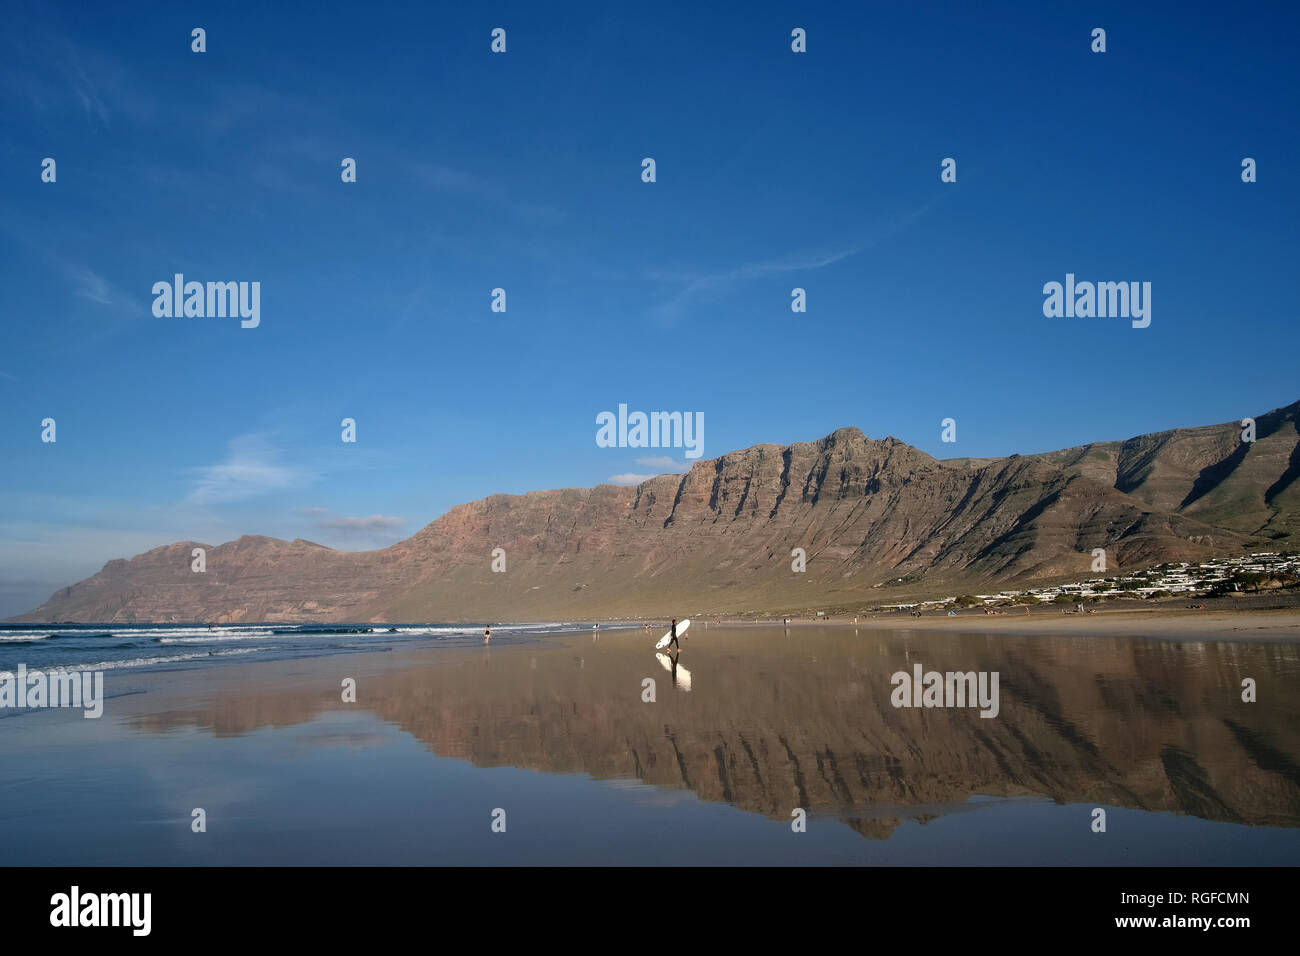 Reflection of the cliff of Famara with surfer on the Playa de Famara. Stock Photo